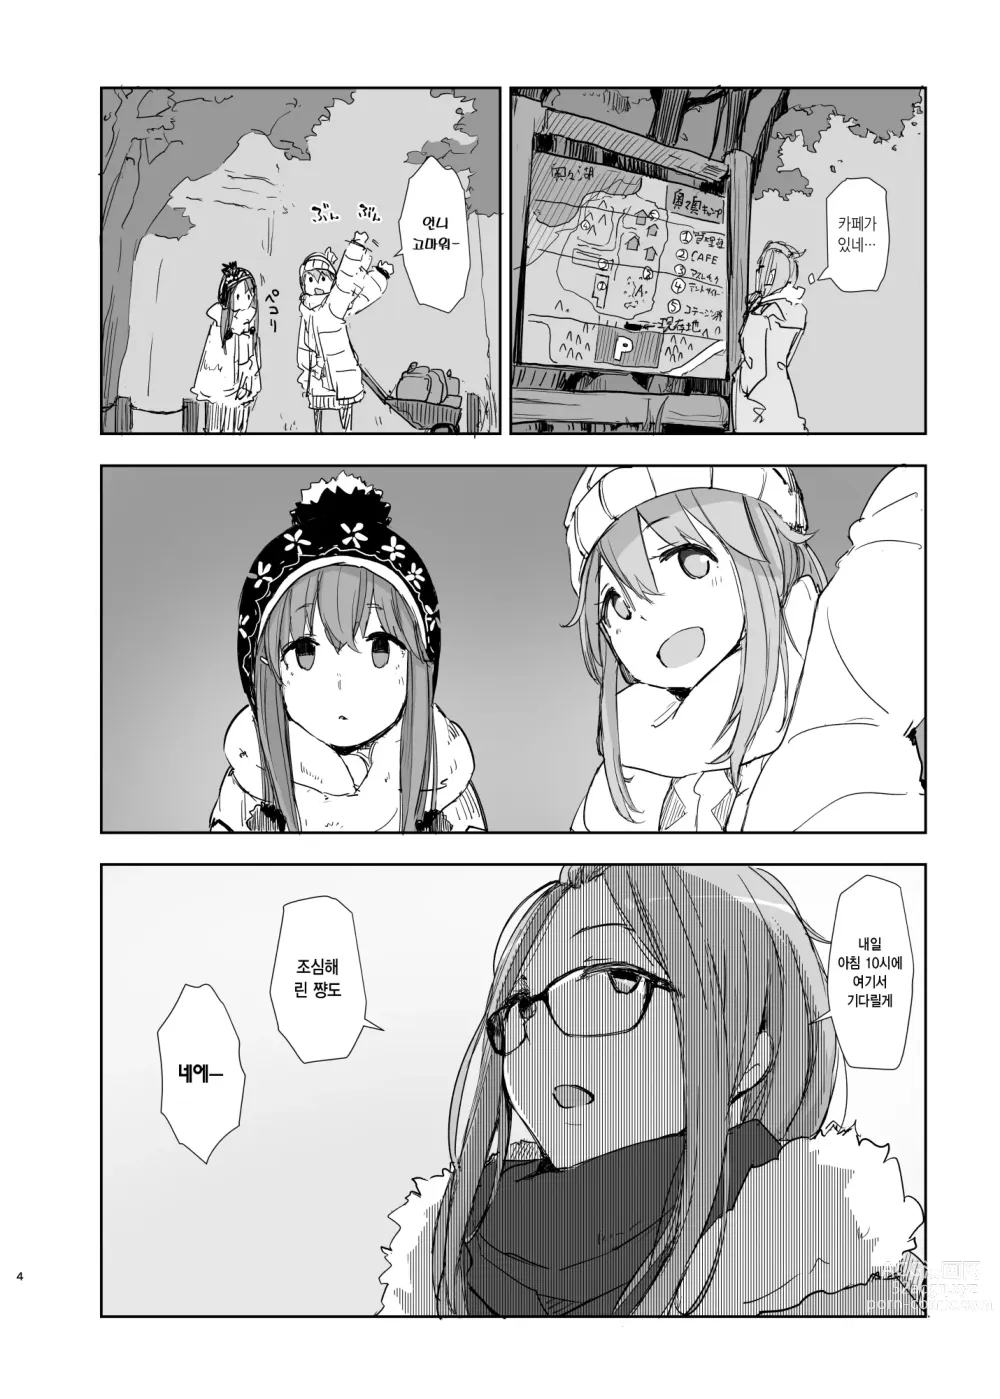 Page 3 of doujinshi 사쿠라캠